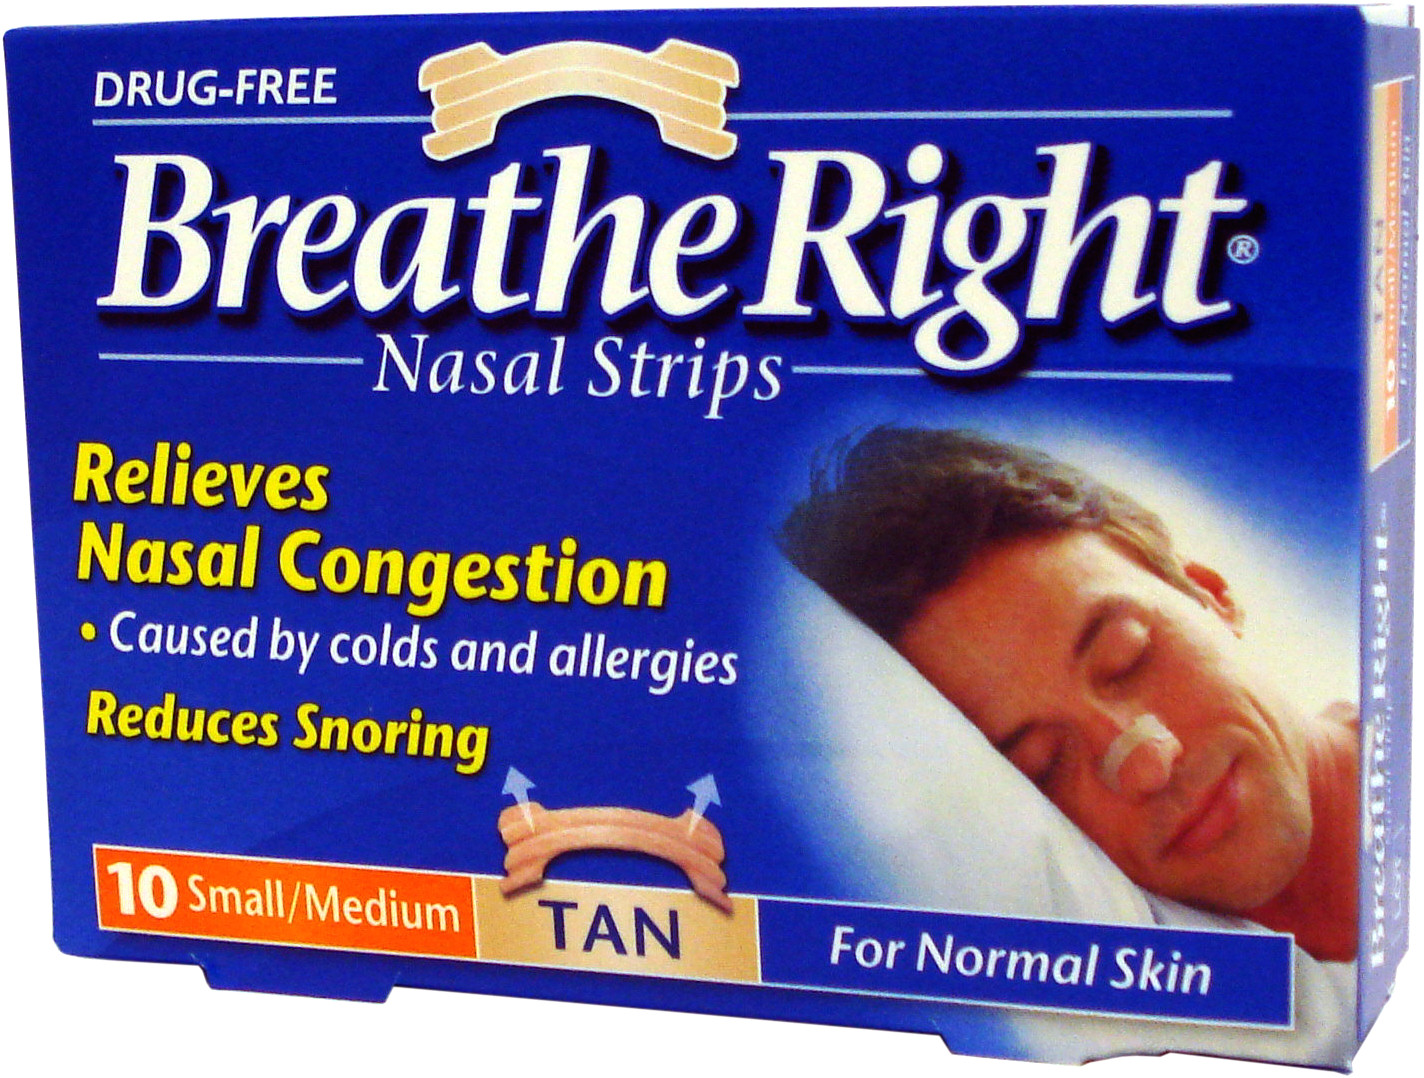 Get Breathe Right Strips for $1.99 at Walgreens after combined c pic